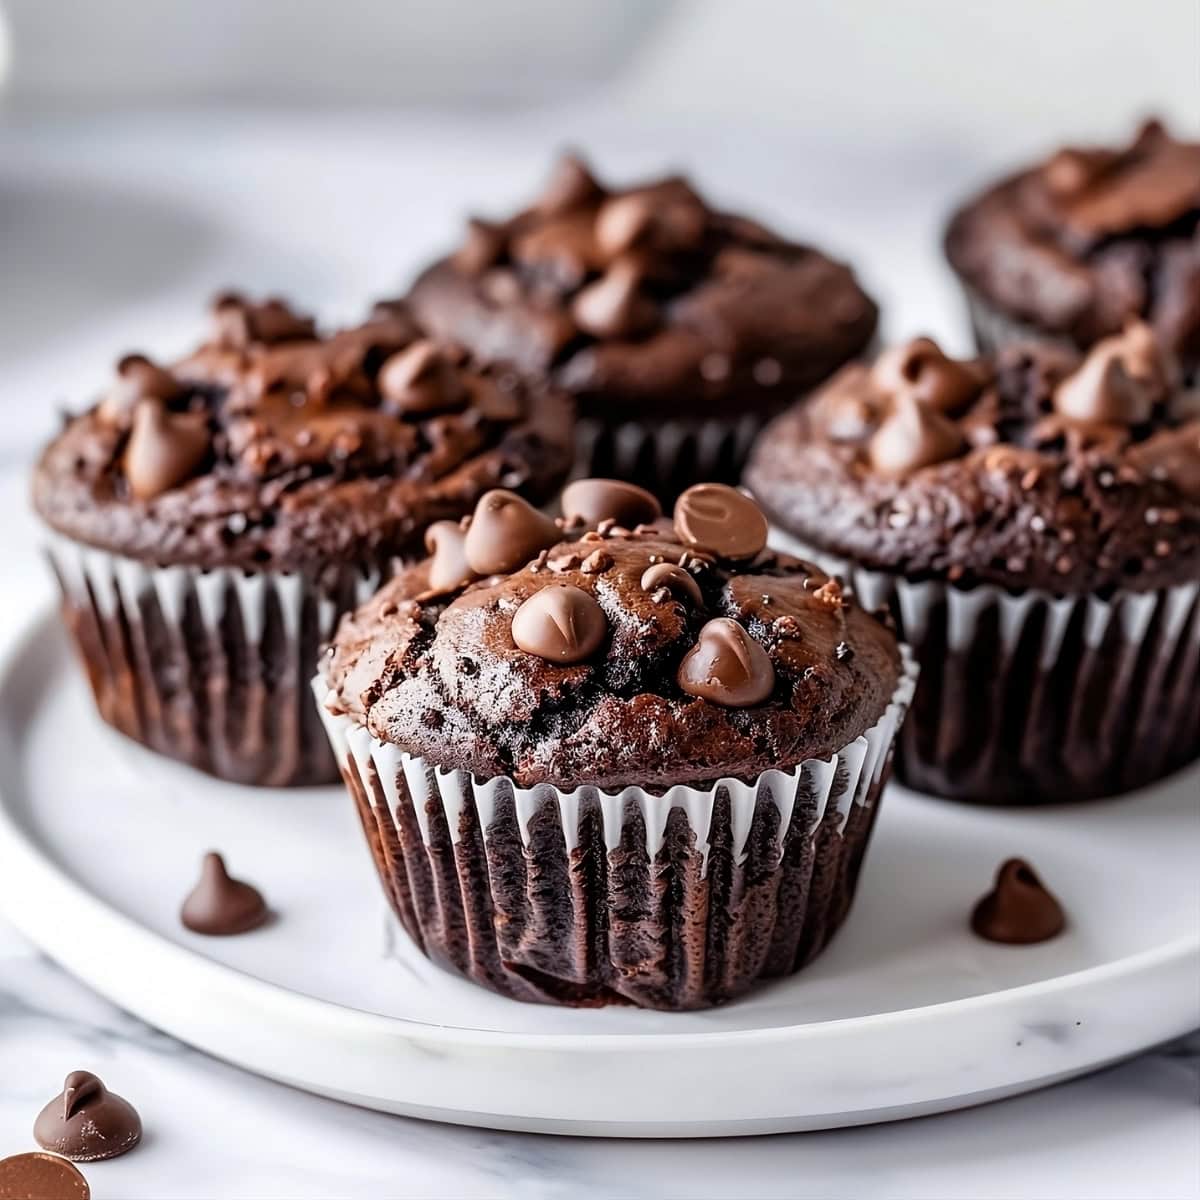 Bunch of triple chocolate muffins arranged in a white plate.